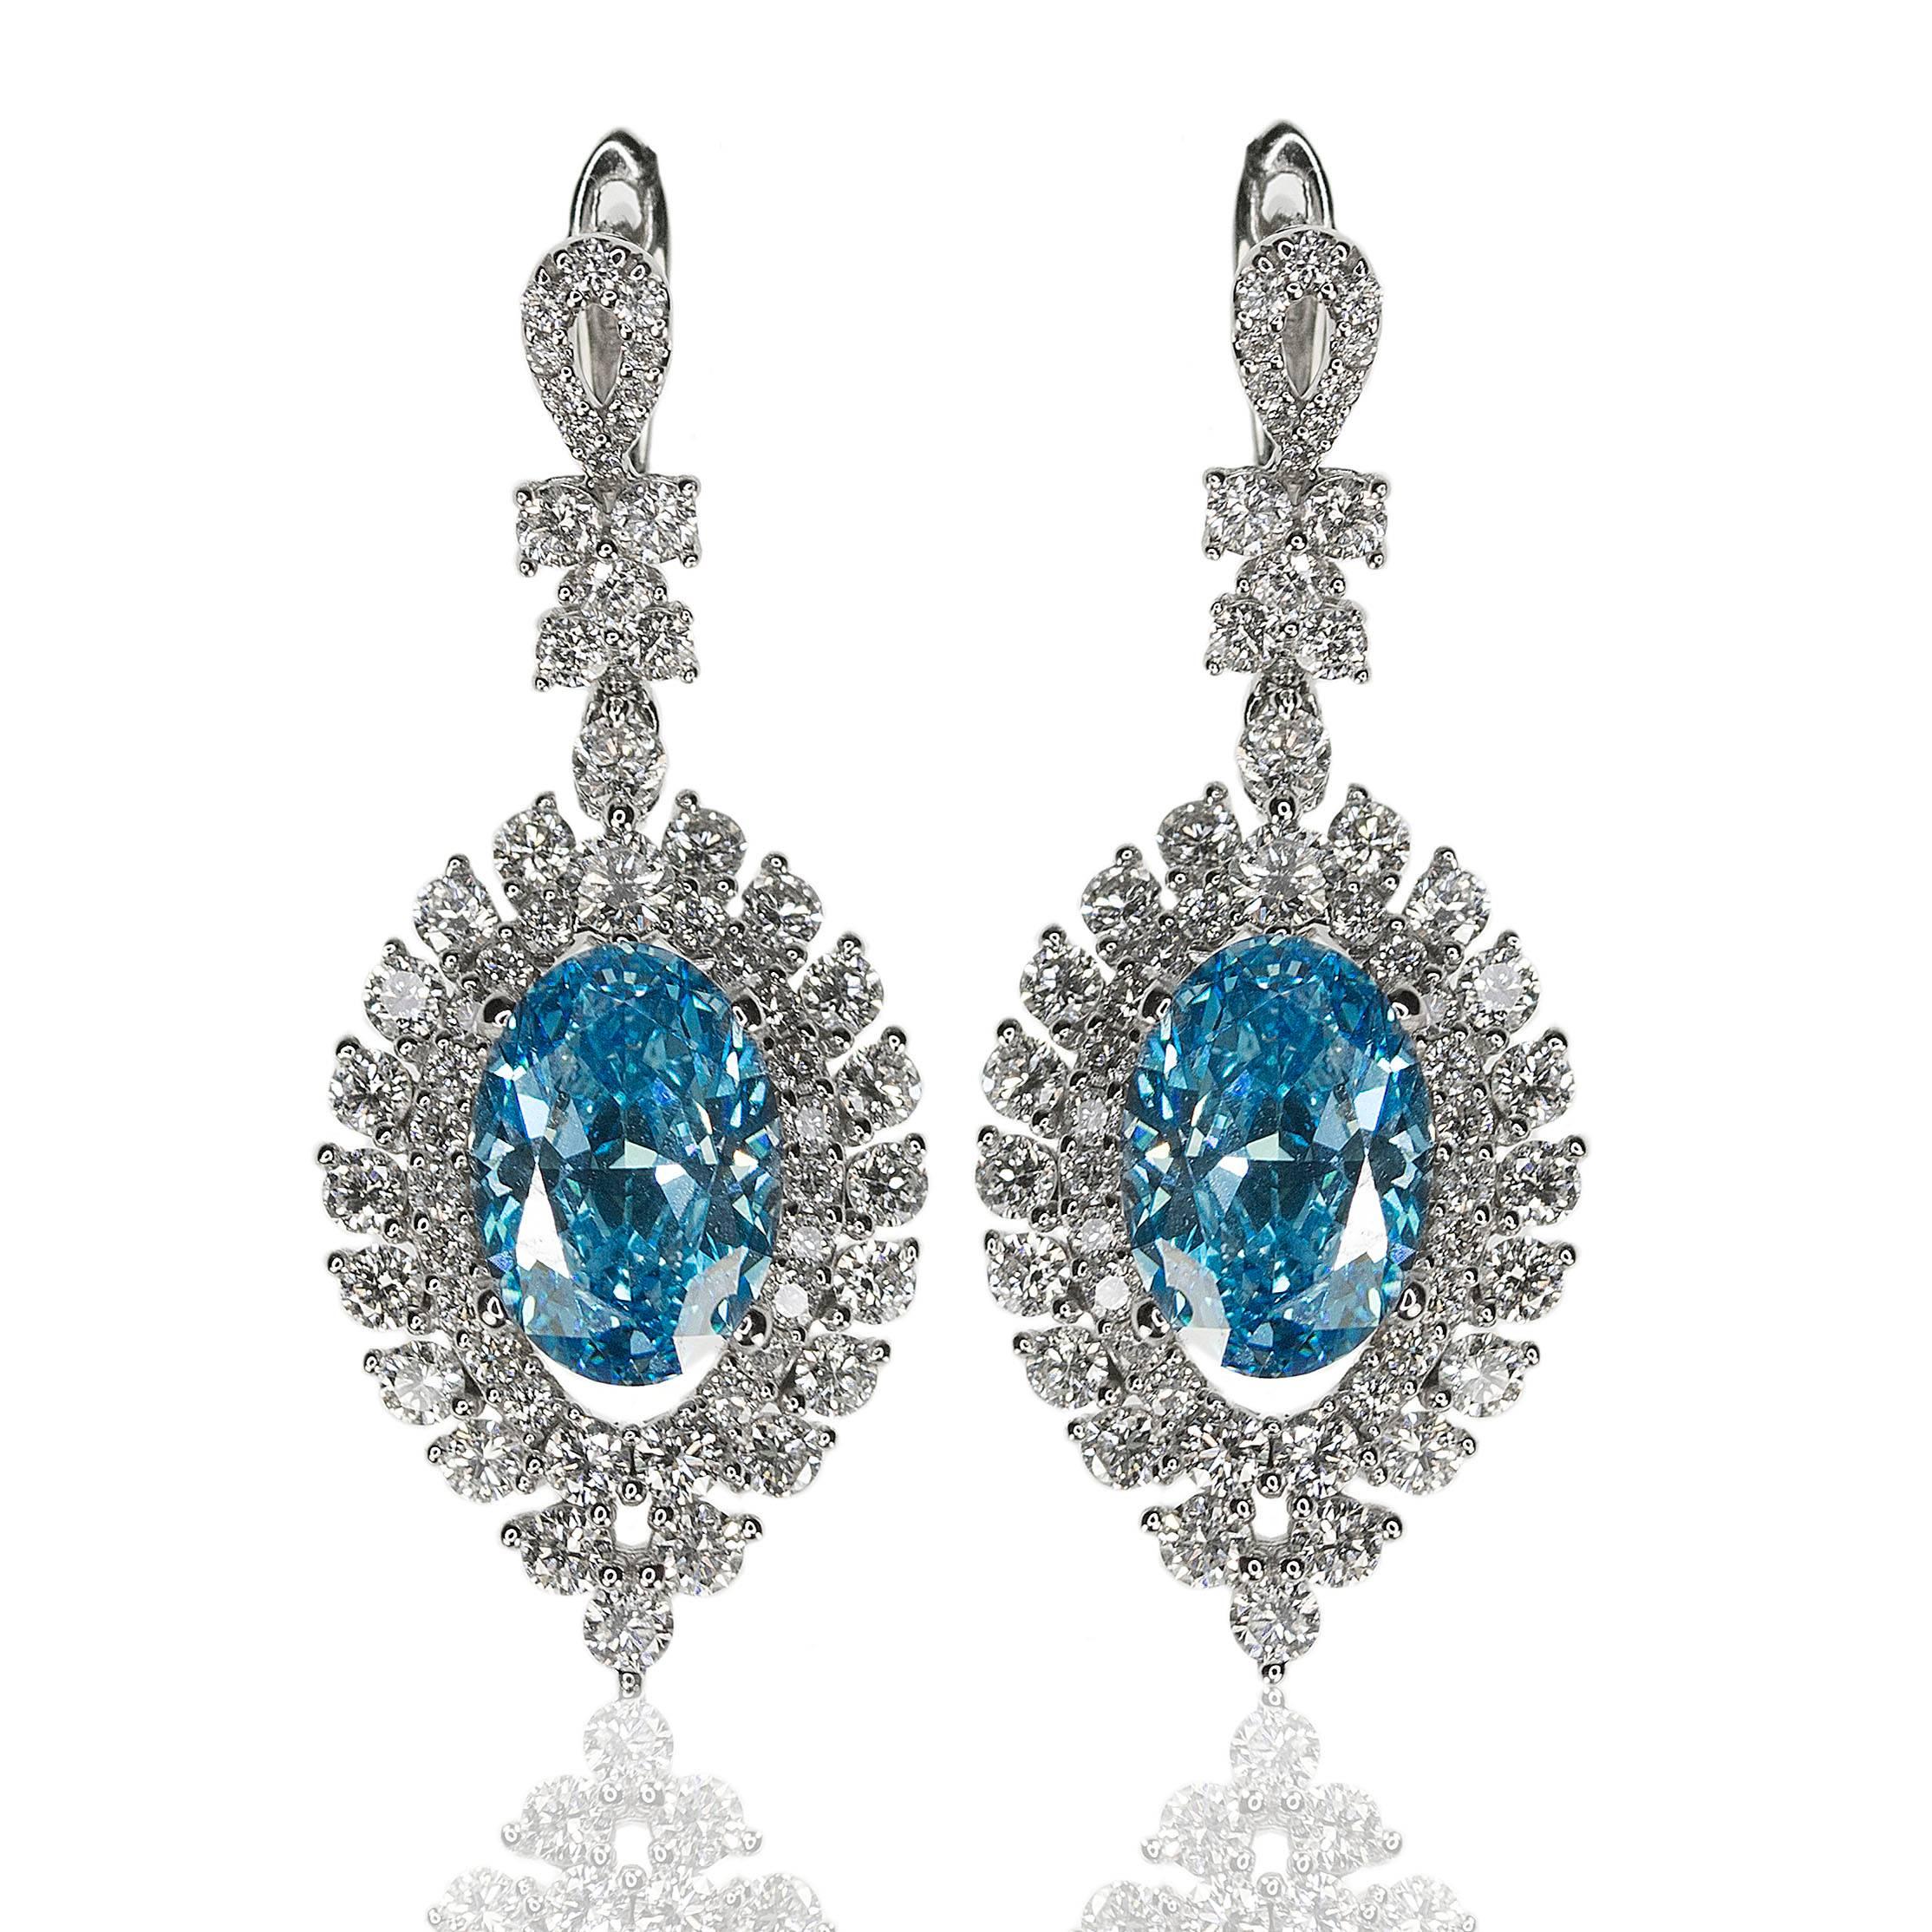 18k Earrings with two GIA certified HPHT Fancy Vivid Blue, VVS1 clarity diamonds weighing 4.12 carats and 1.12 carats of fine white natural diamonds.